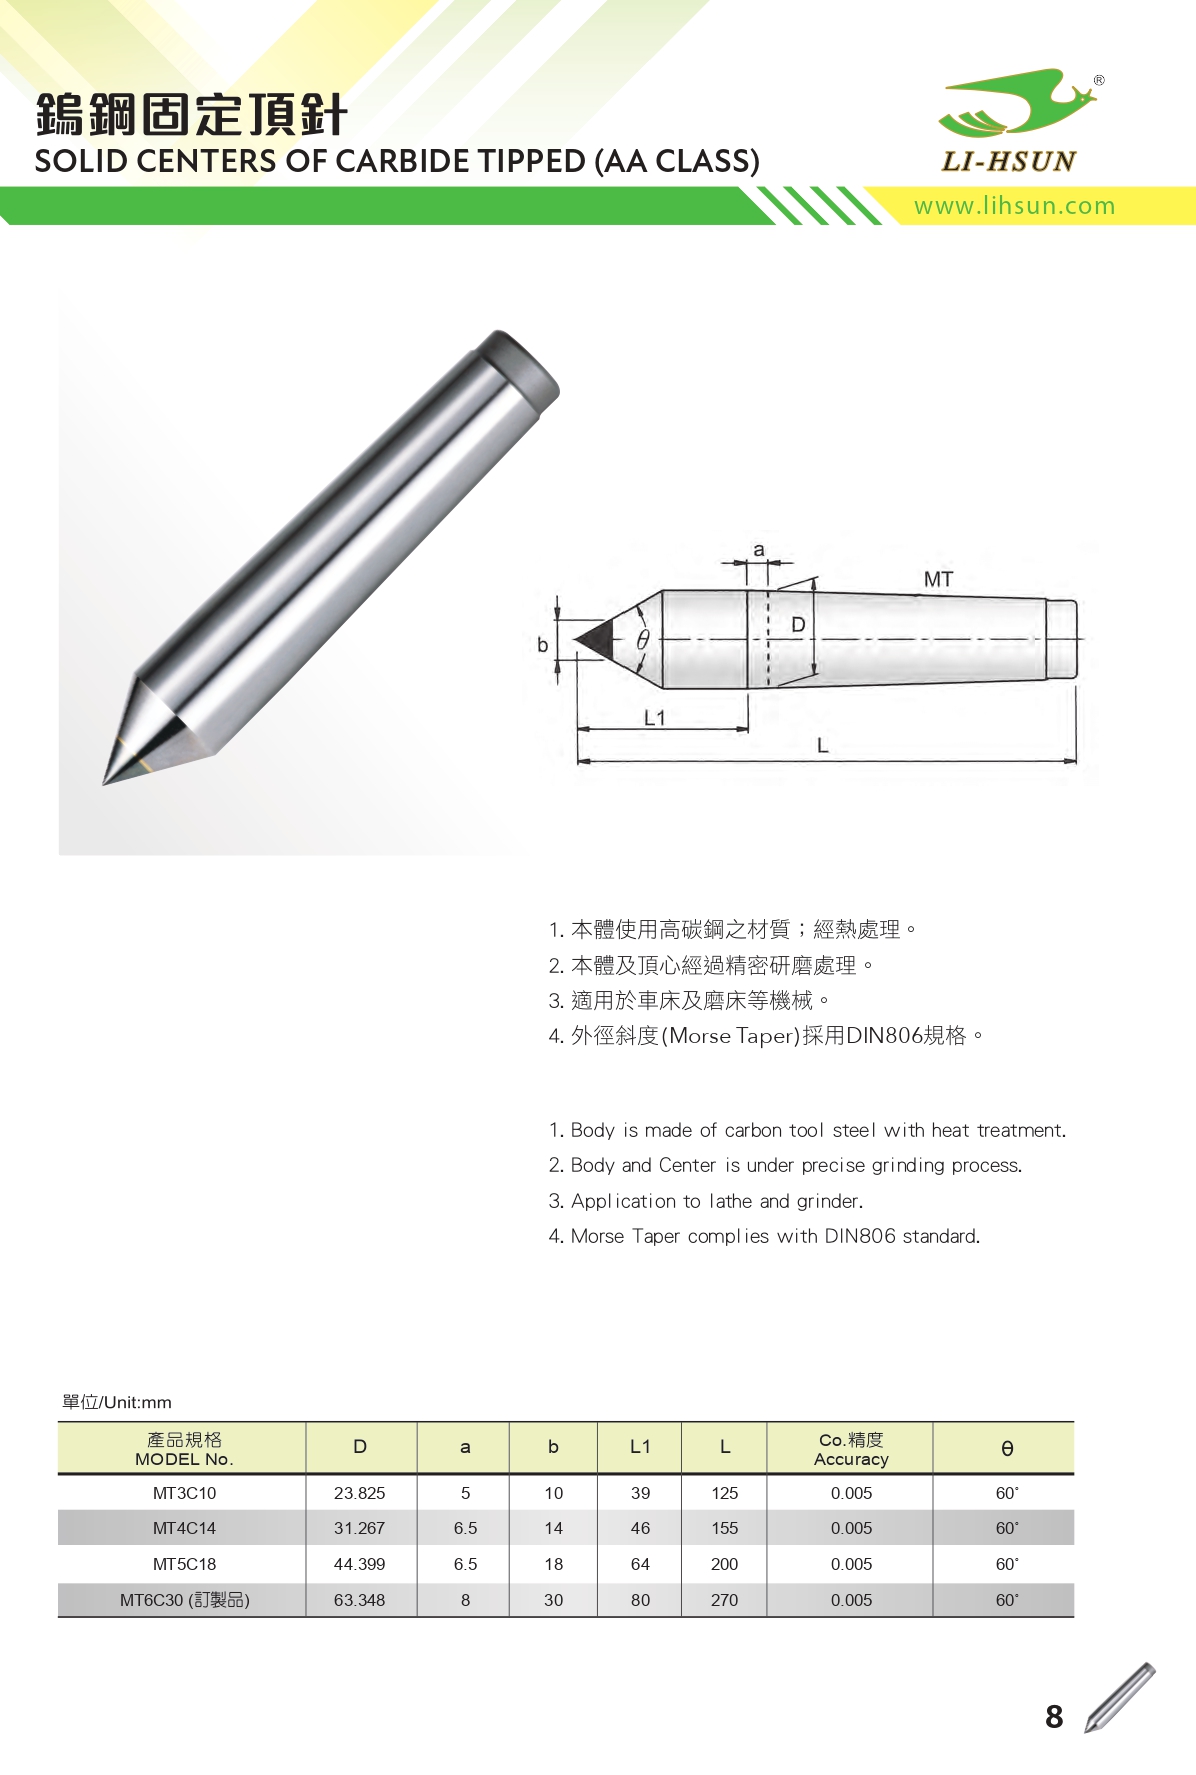 Catalog|SOLID CENTERS OF CARBIDE TIPPED